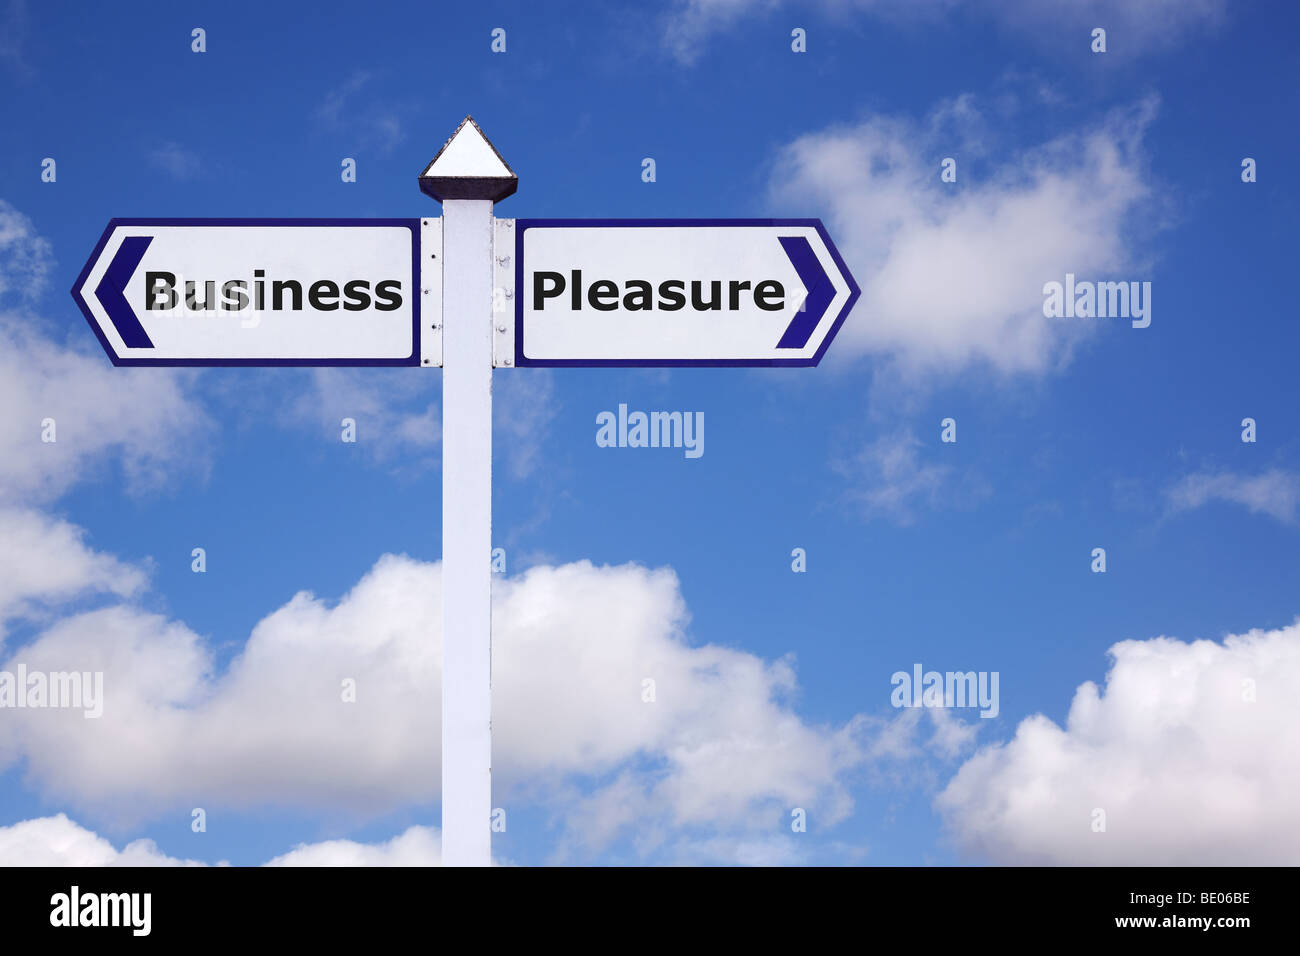 Business and Pleasure on a signpost against a blue cloudy sky Stock Photo